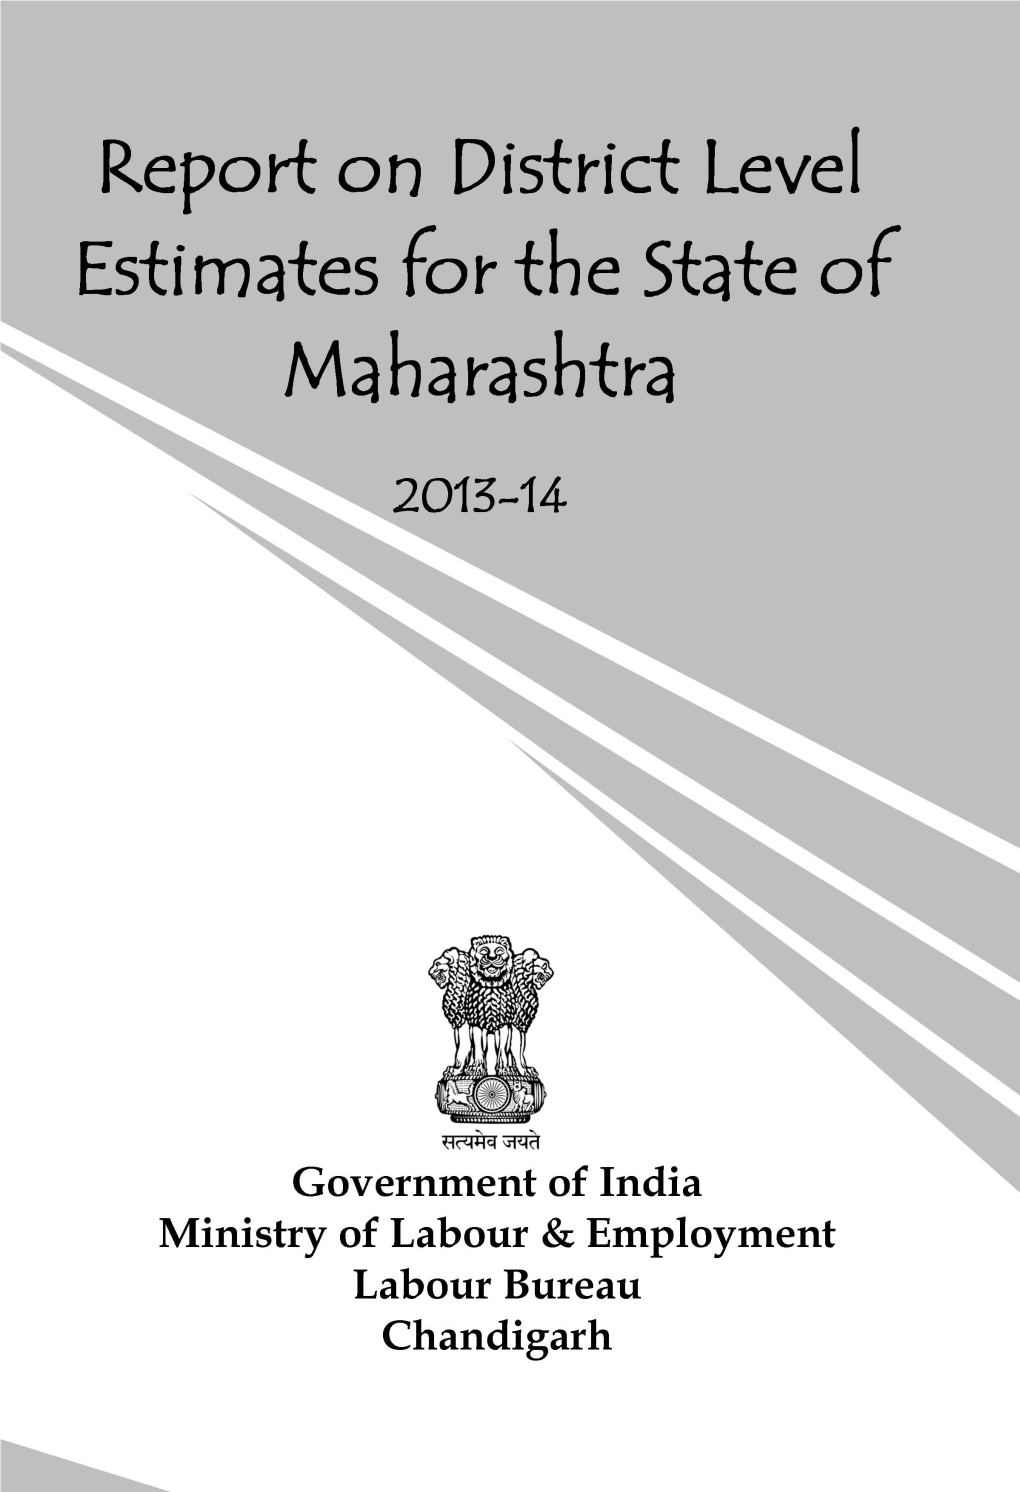 Report on District Level Estimates for the State of Maharashtra (2013-14)